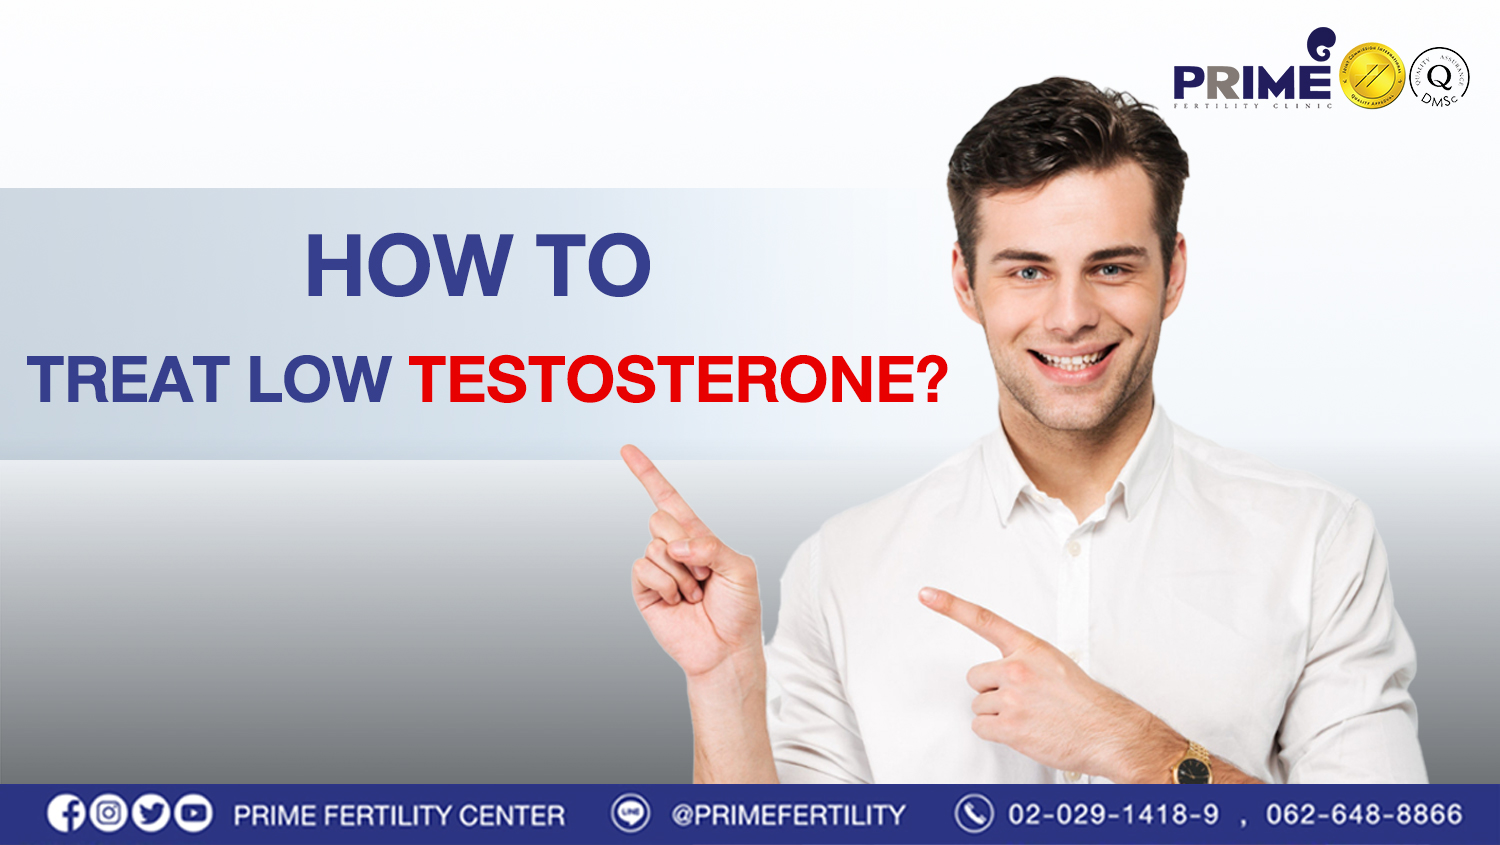 How to treat low testosterone?